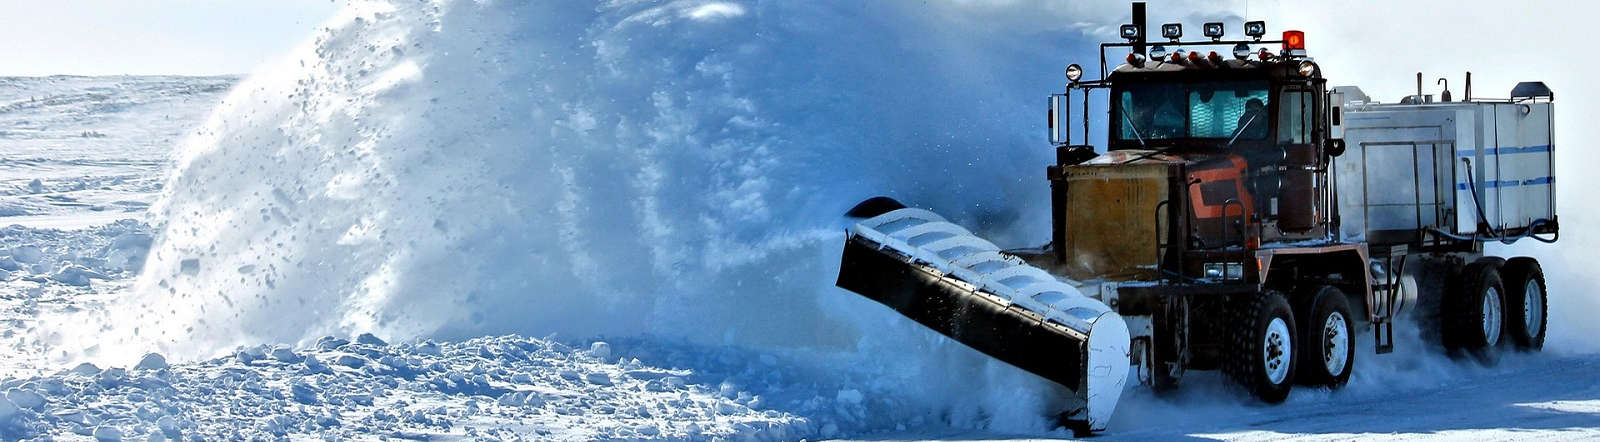 Image by Skentophyte from Pixabay of snow plow